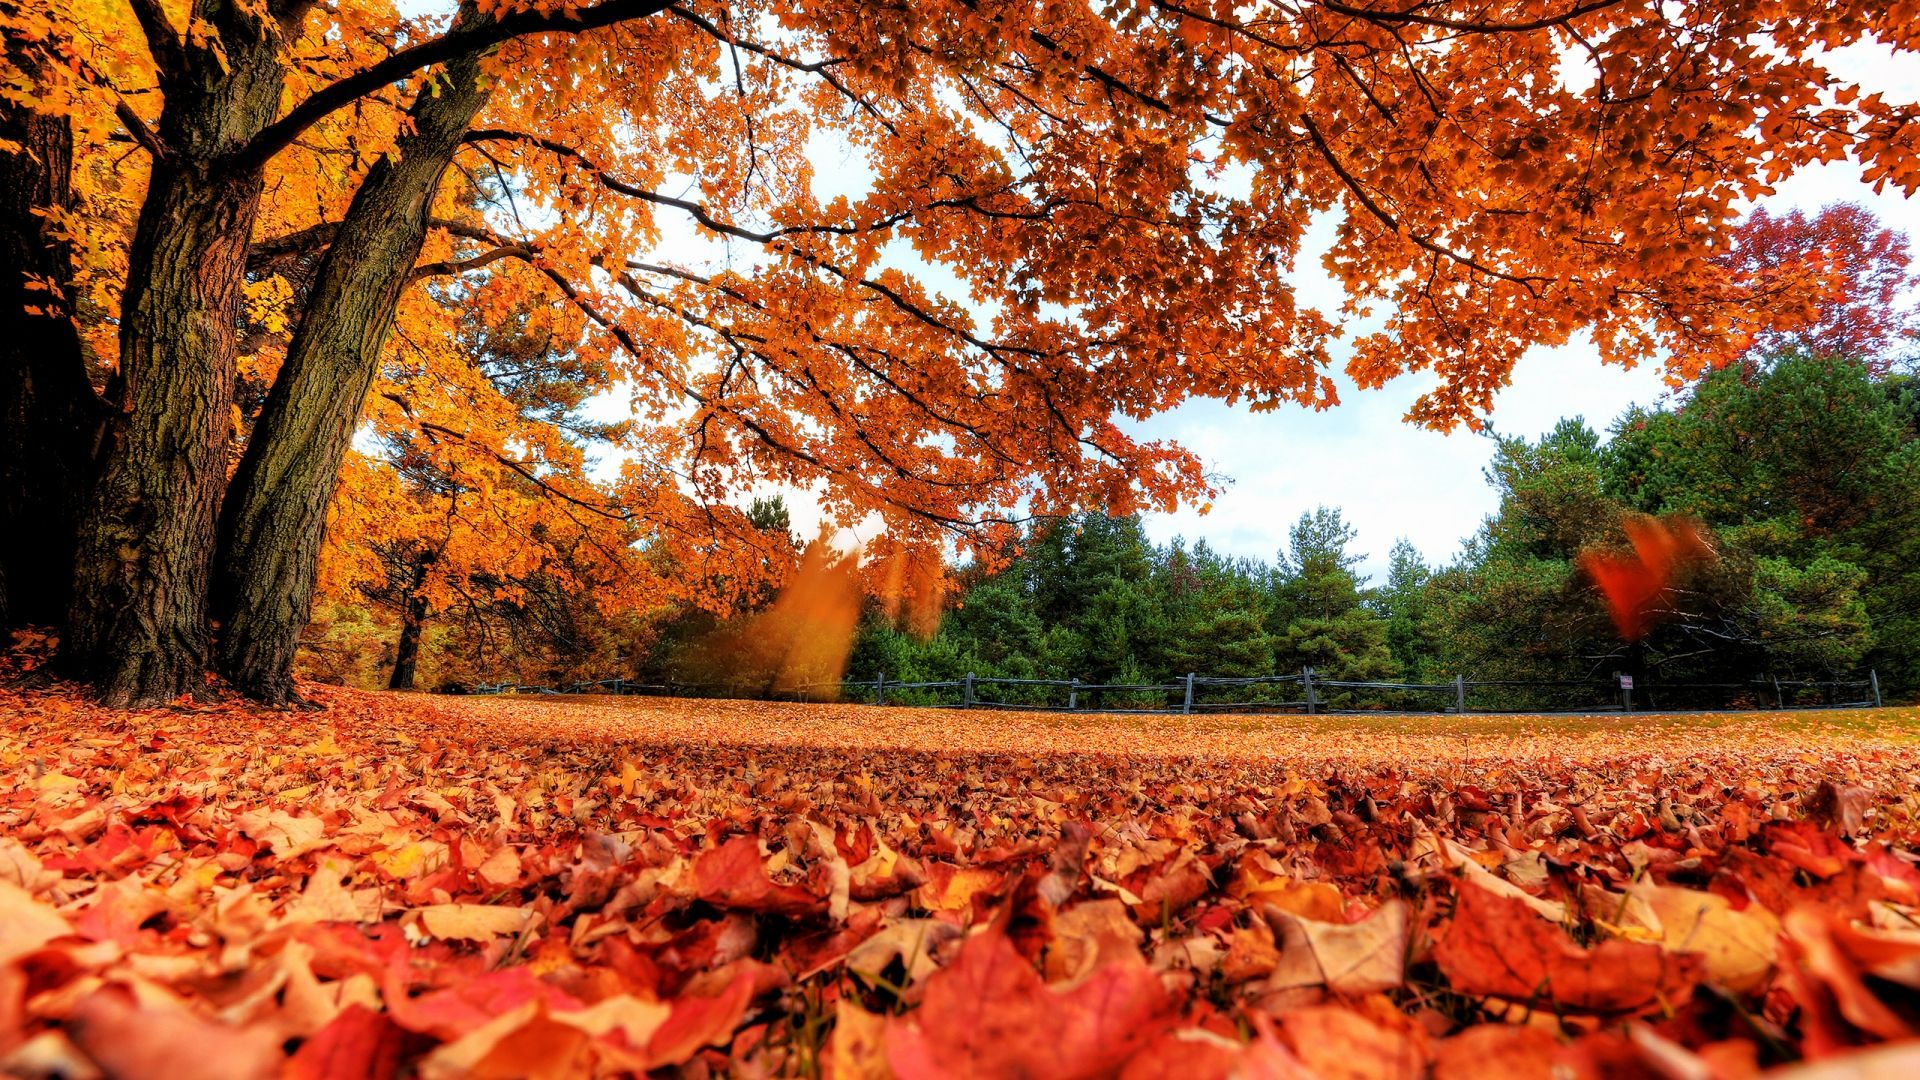 1920x1080 Fall Clean Ups Are Important, And We Can Help! | Autumn leaves wallpaper, Autumn scenery, Fall leaves background